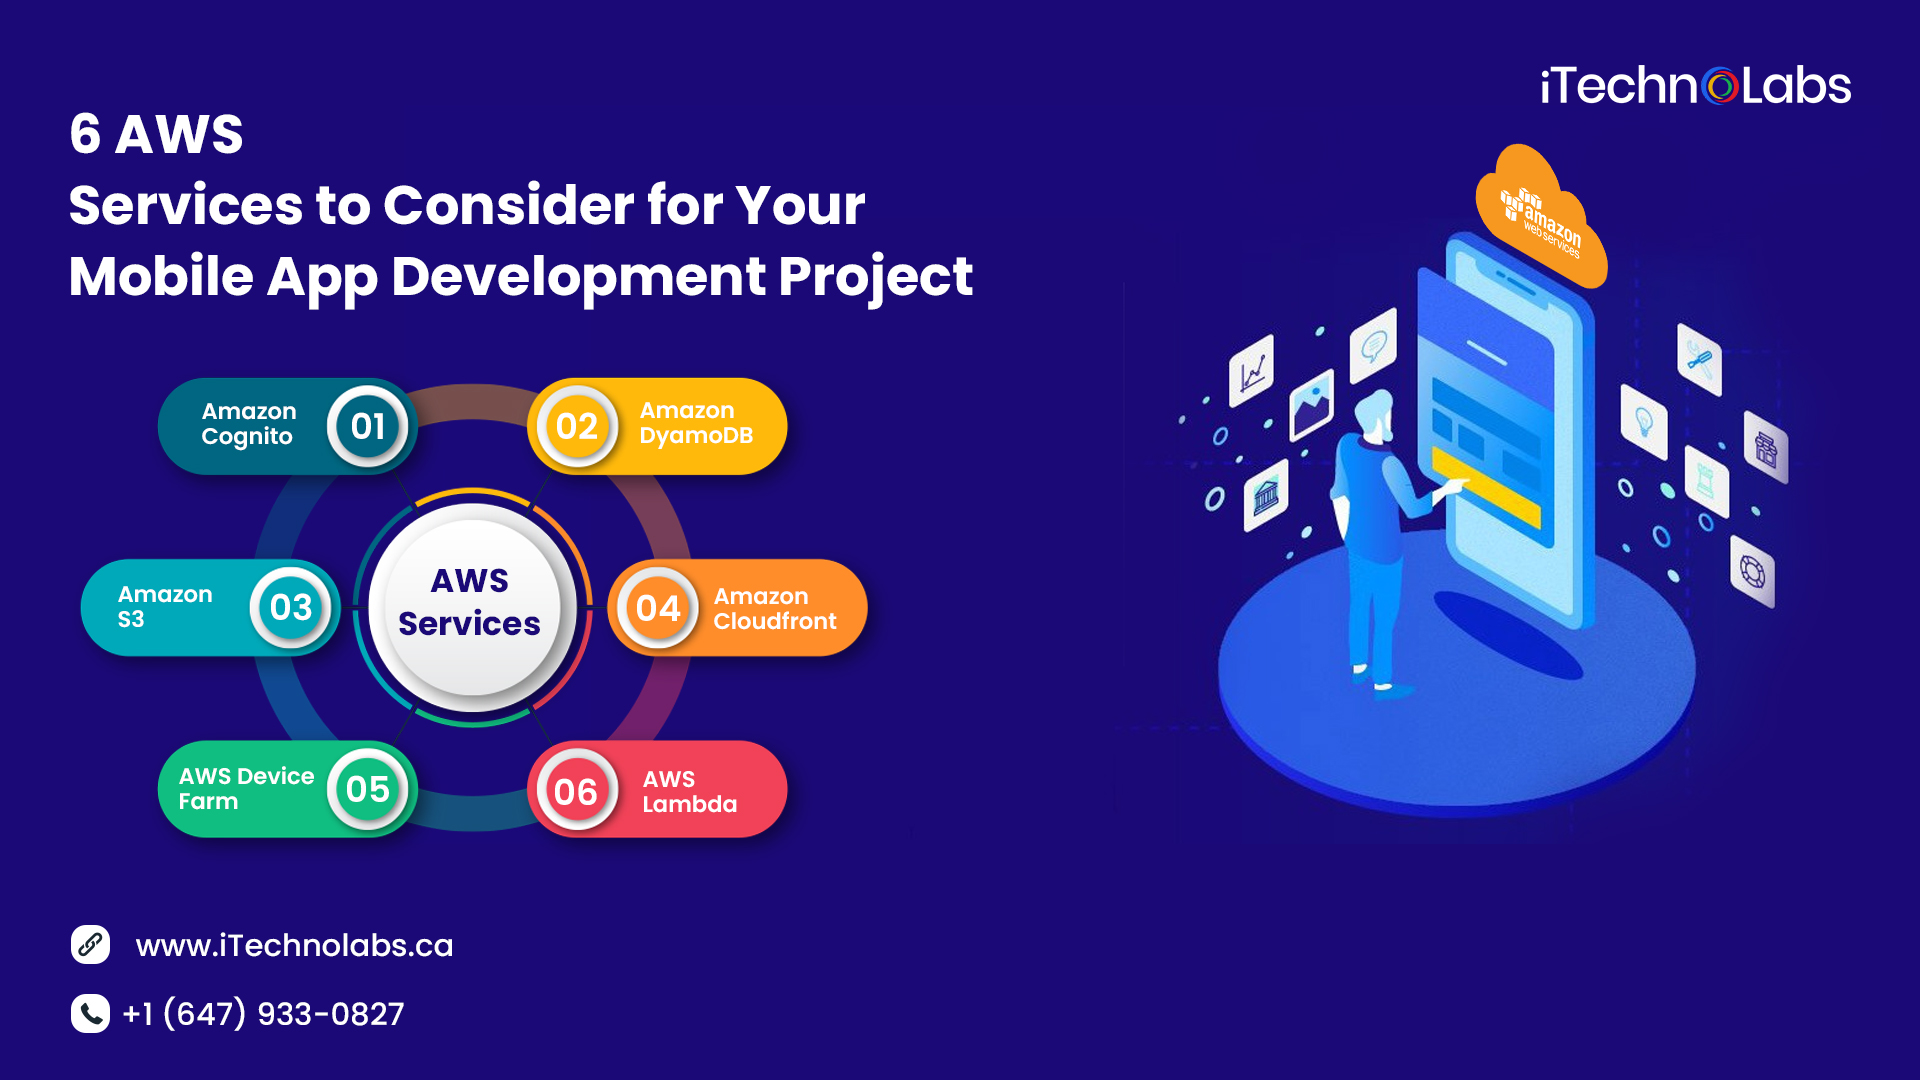 6 AWS Services for Mobile App Development itechnolabs